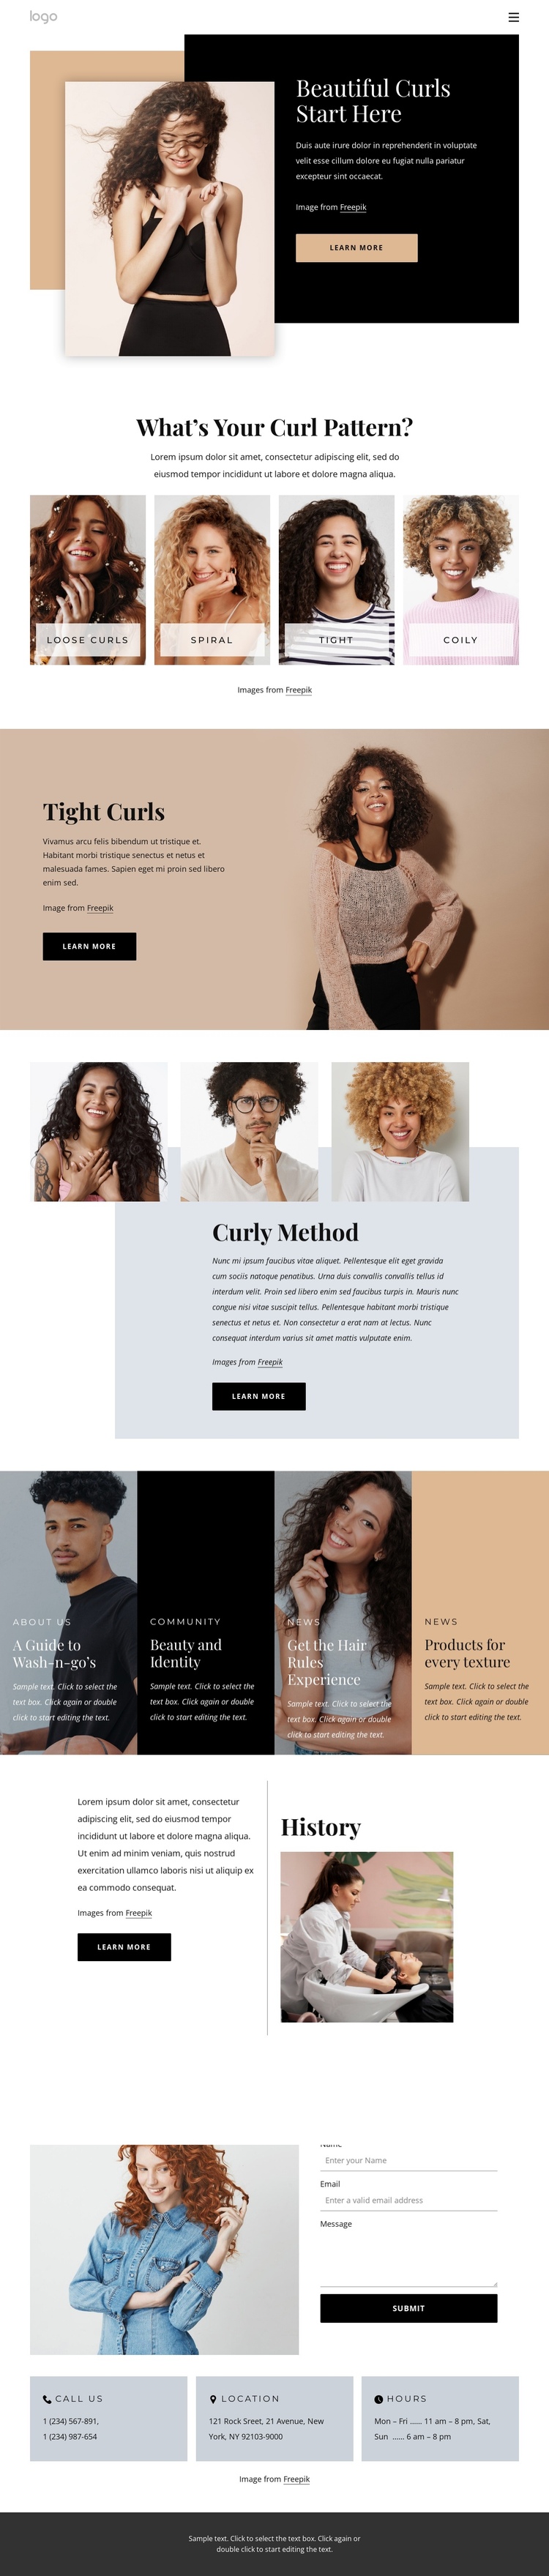 Bring out the best in your curls One Page Template